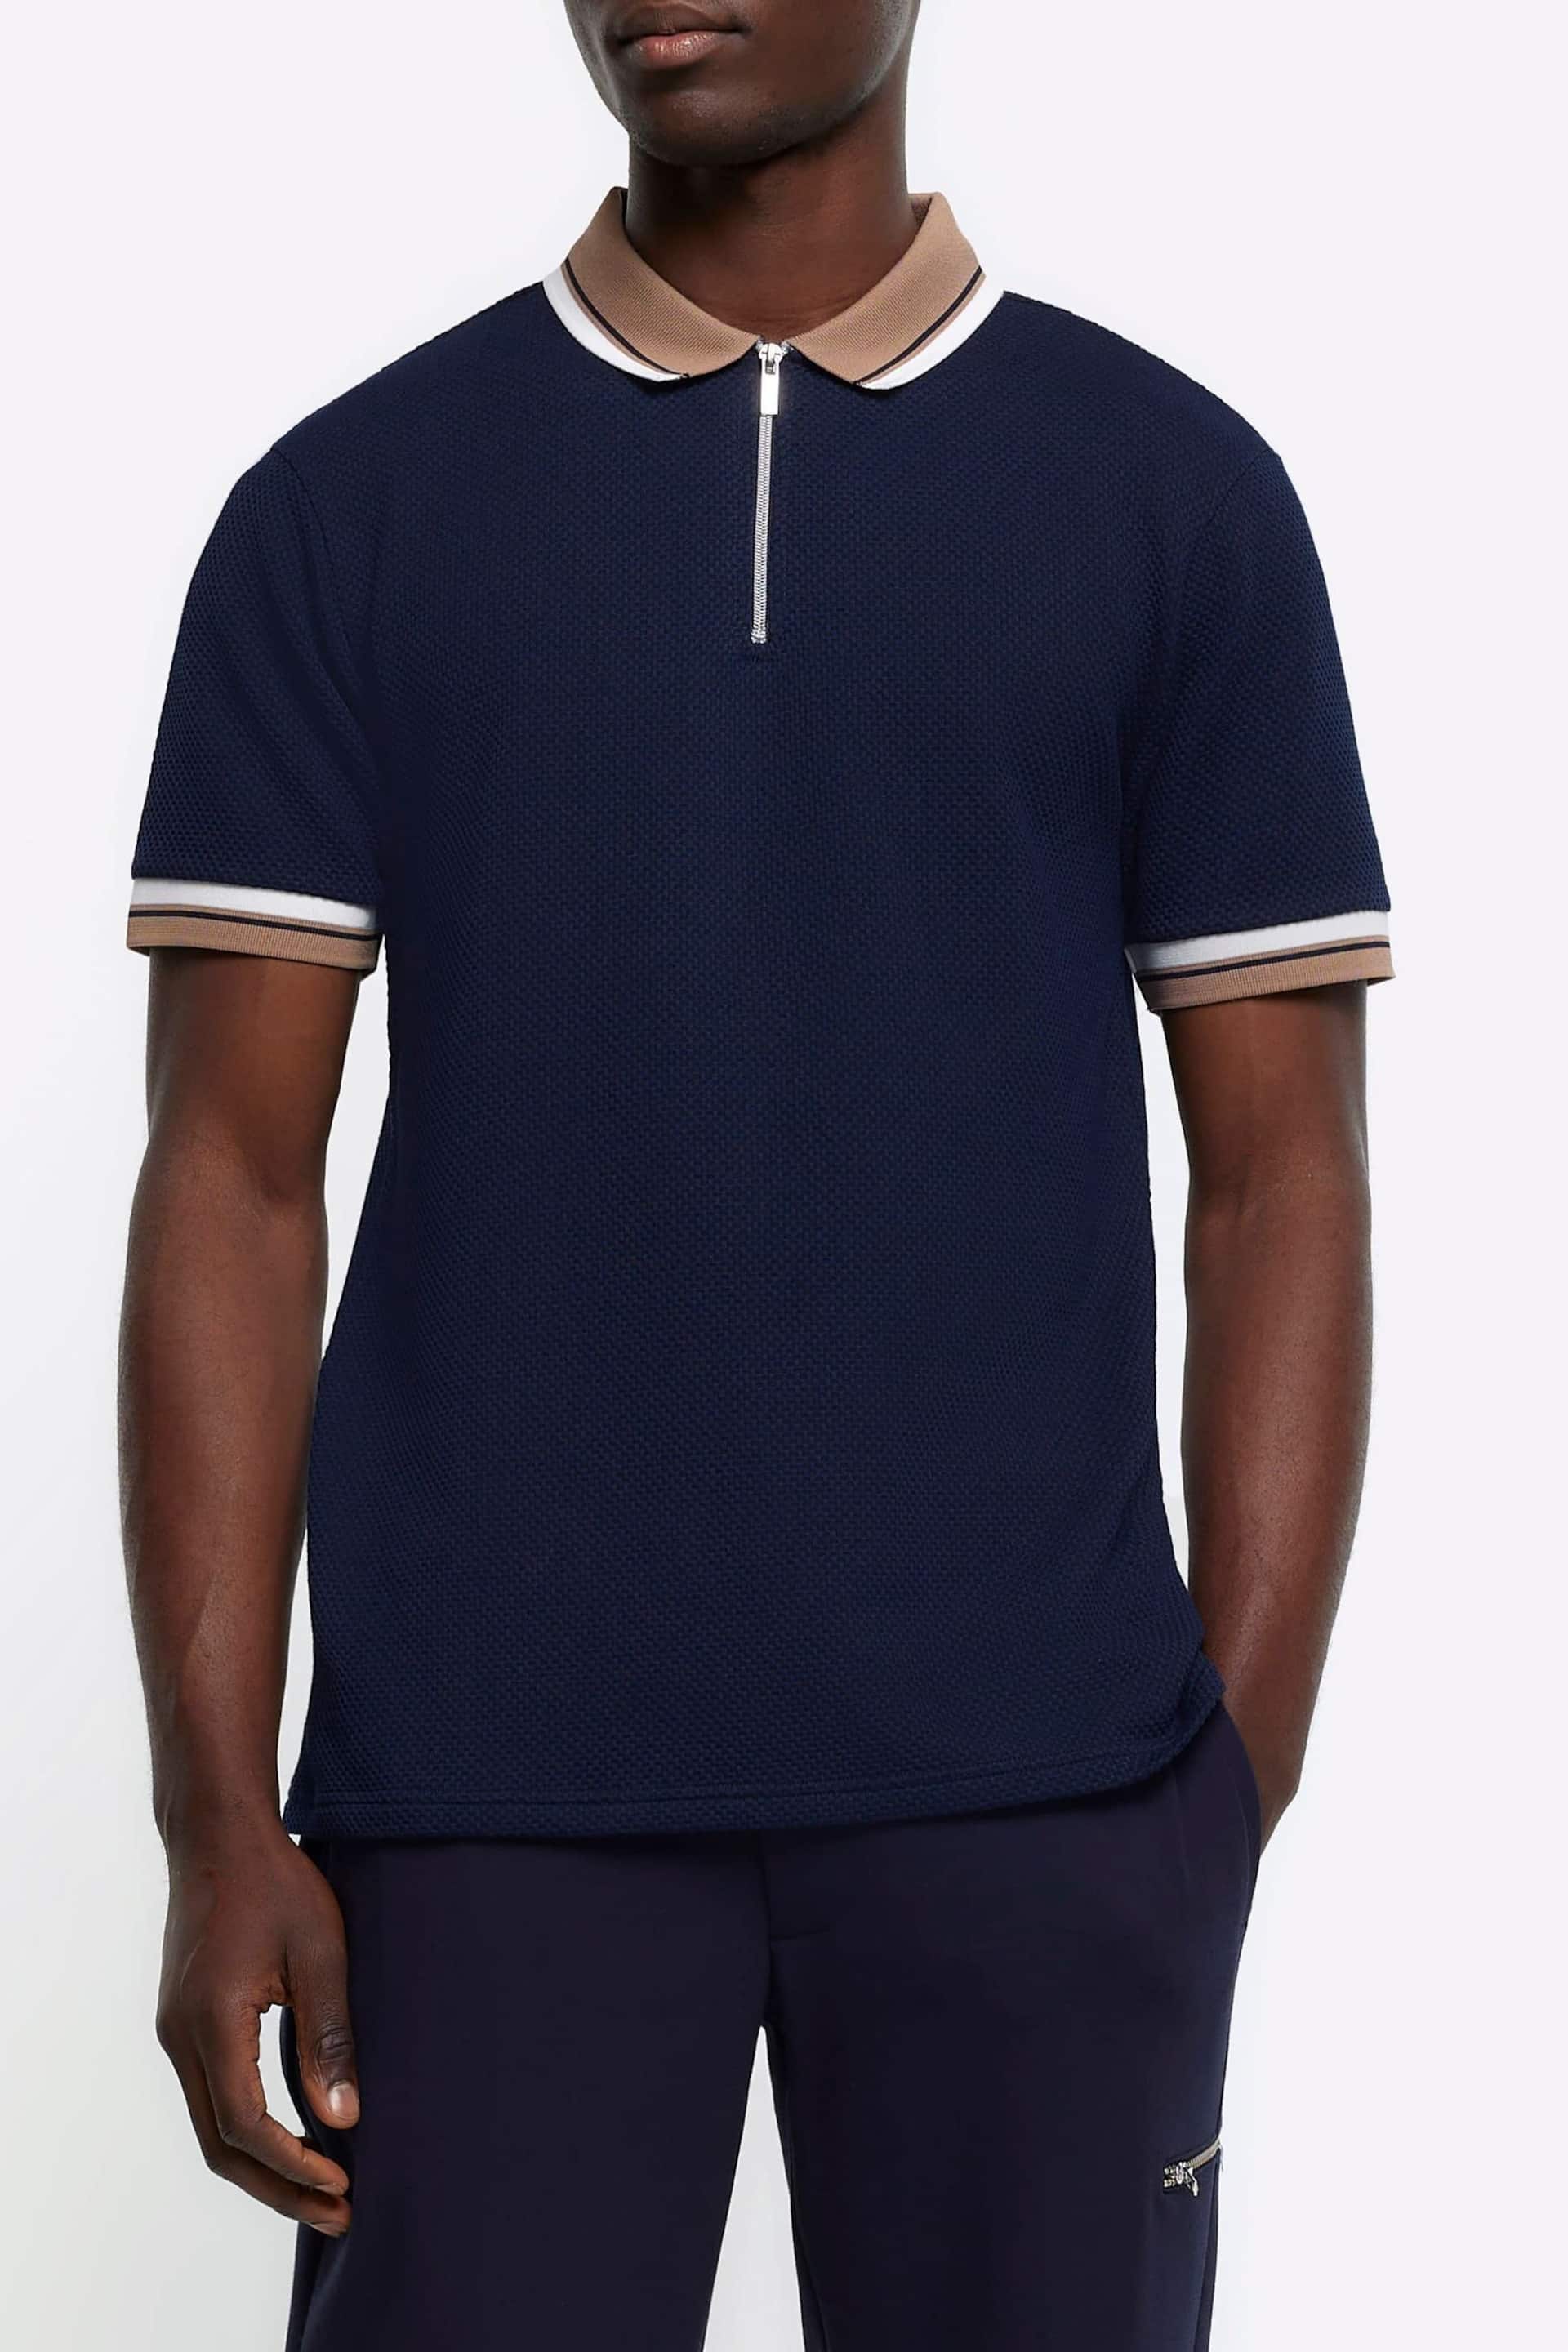 River Island Blue Tap Contrast Collar Regular Fit Polo Shirt - Image 1 of 4